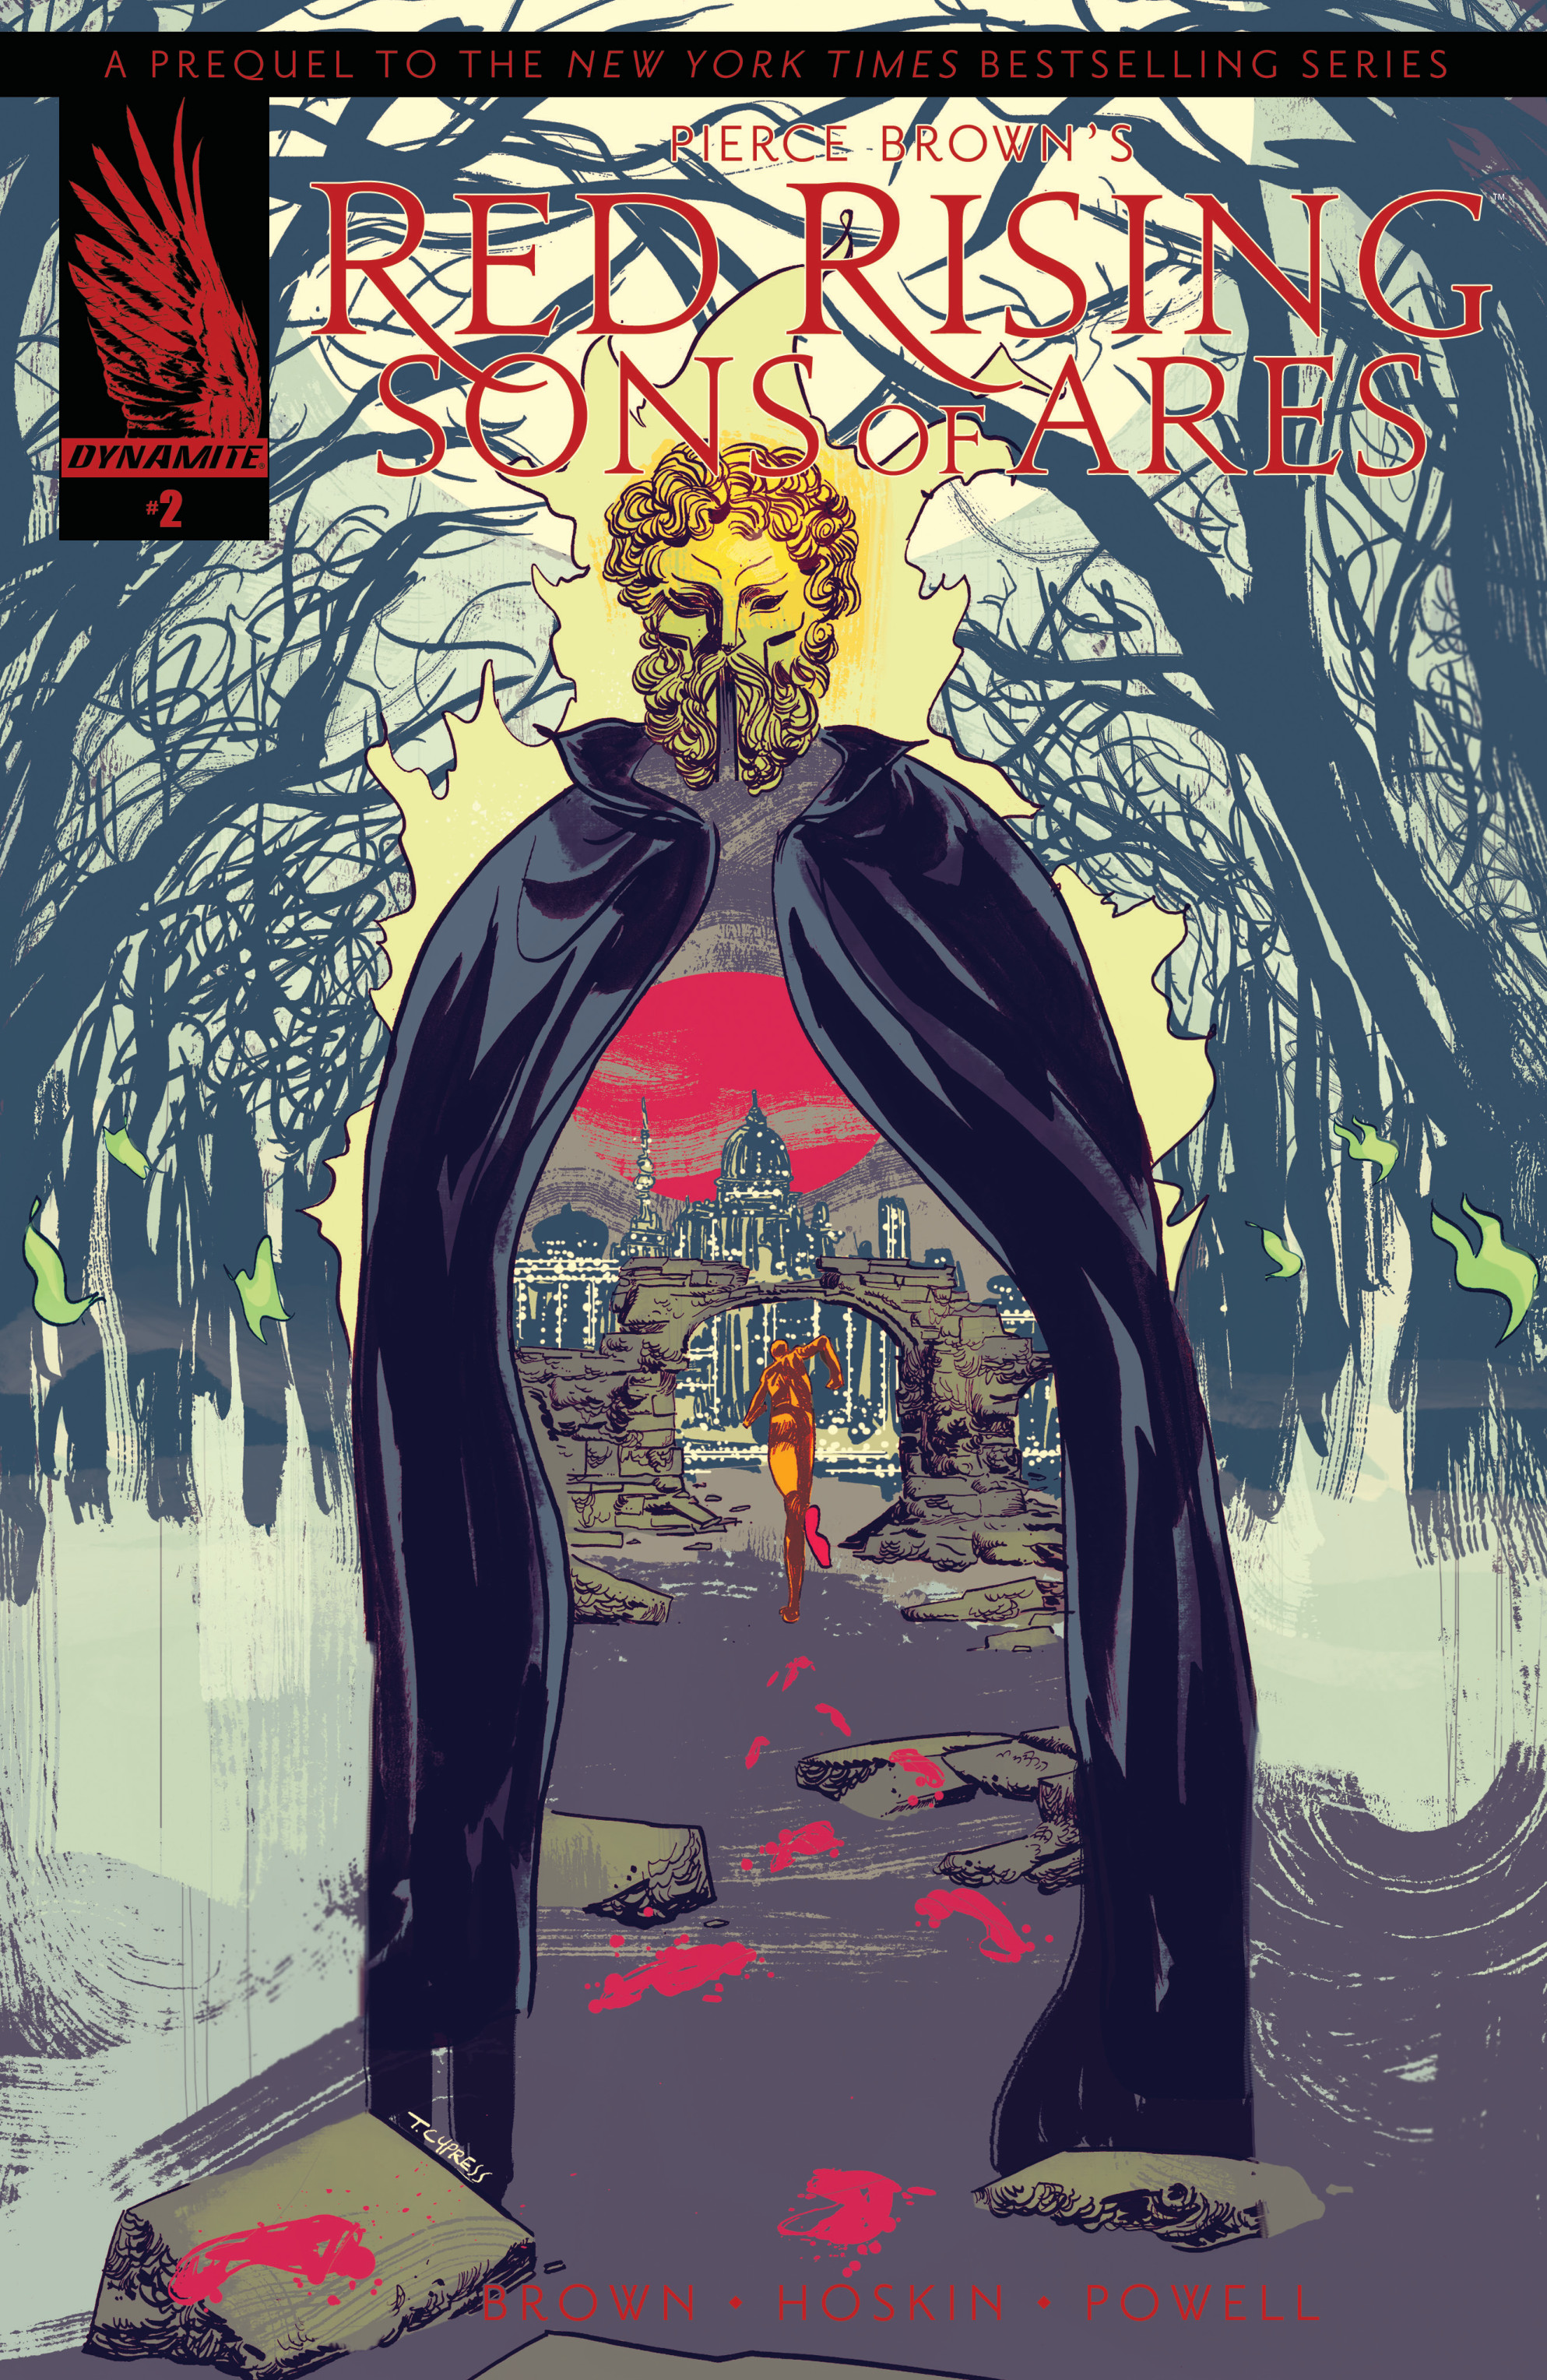 Read online Pierce Brown's Red Rising: Son Of Ares comic -  Issue #2 - 1